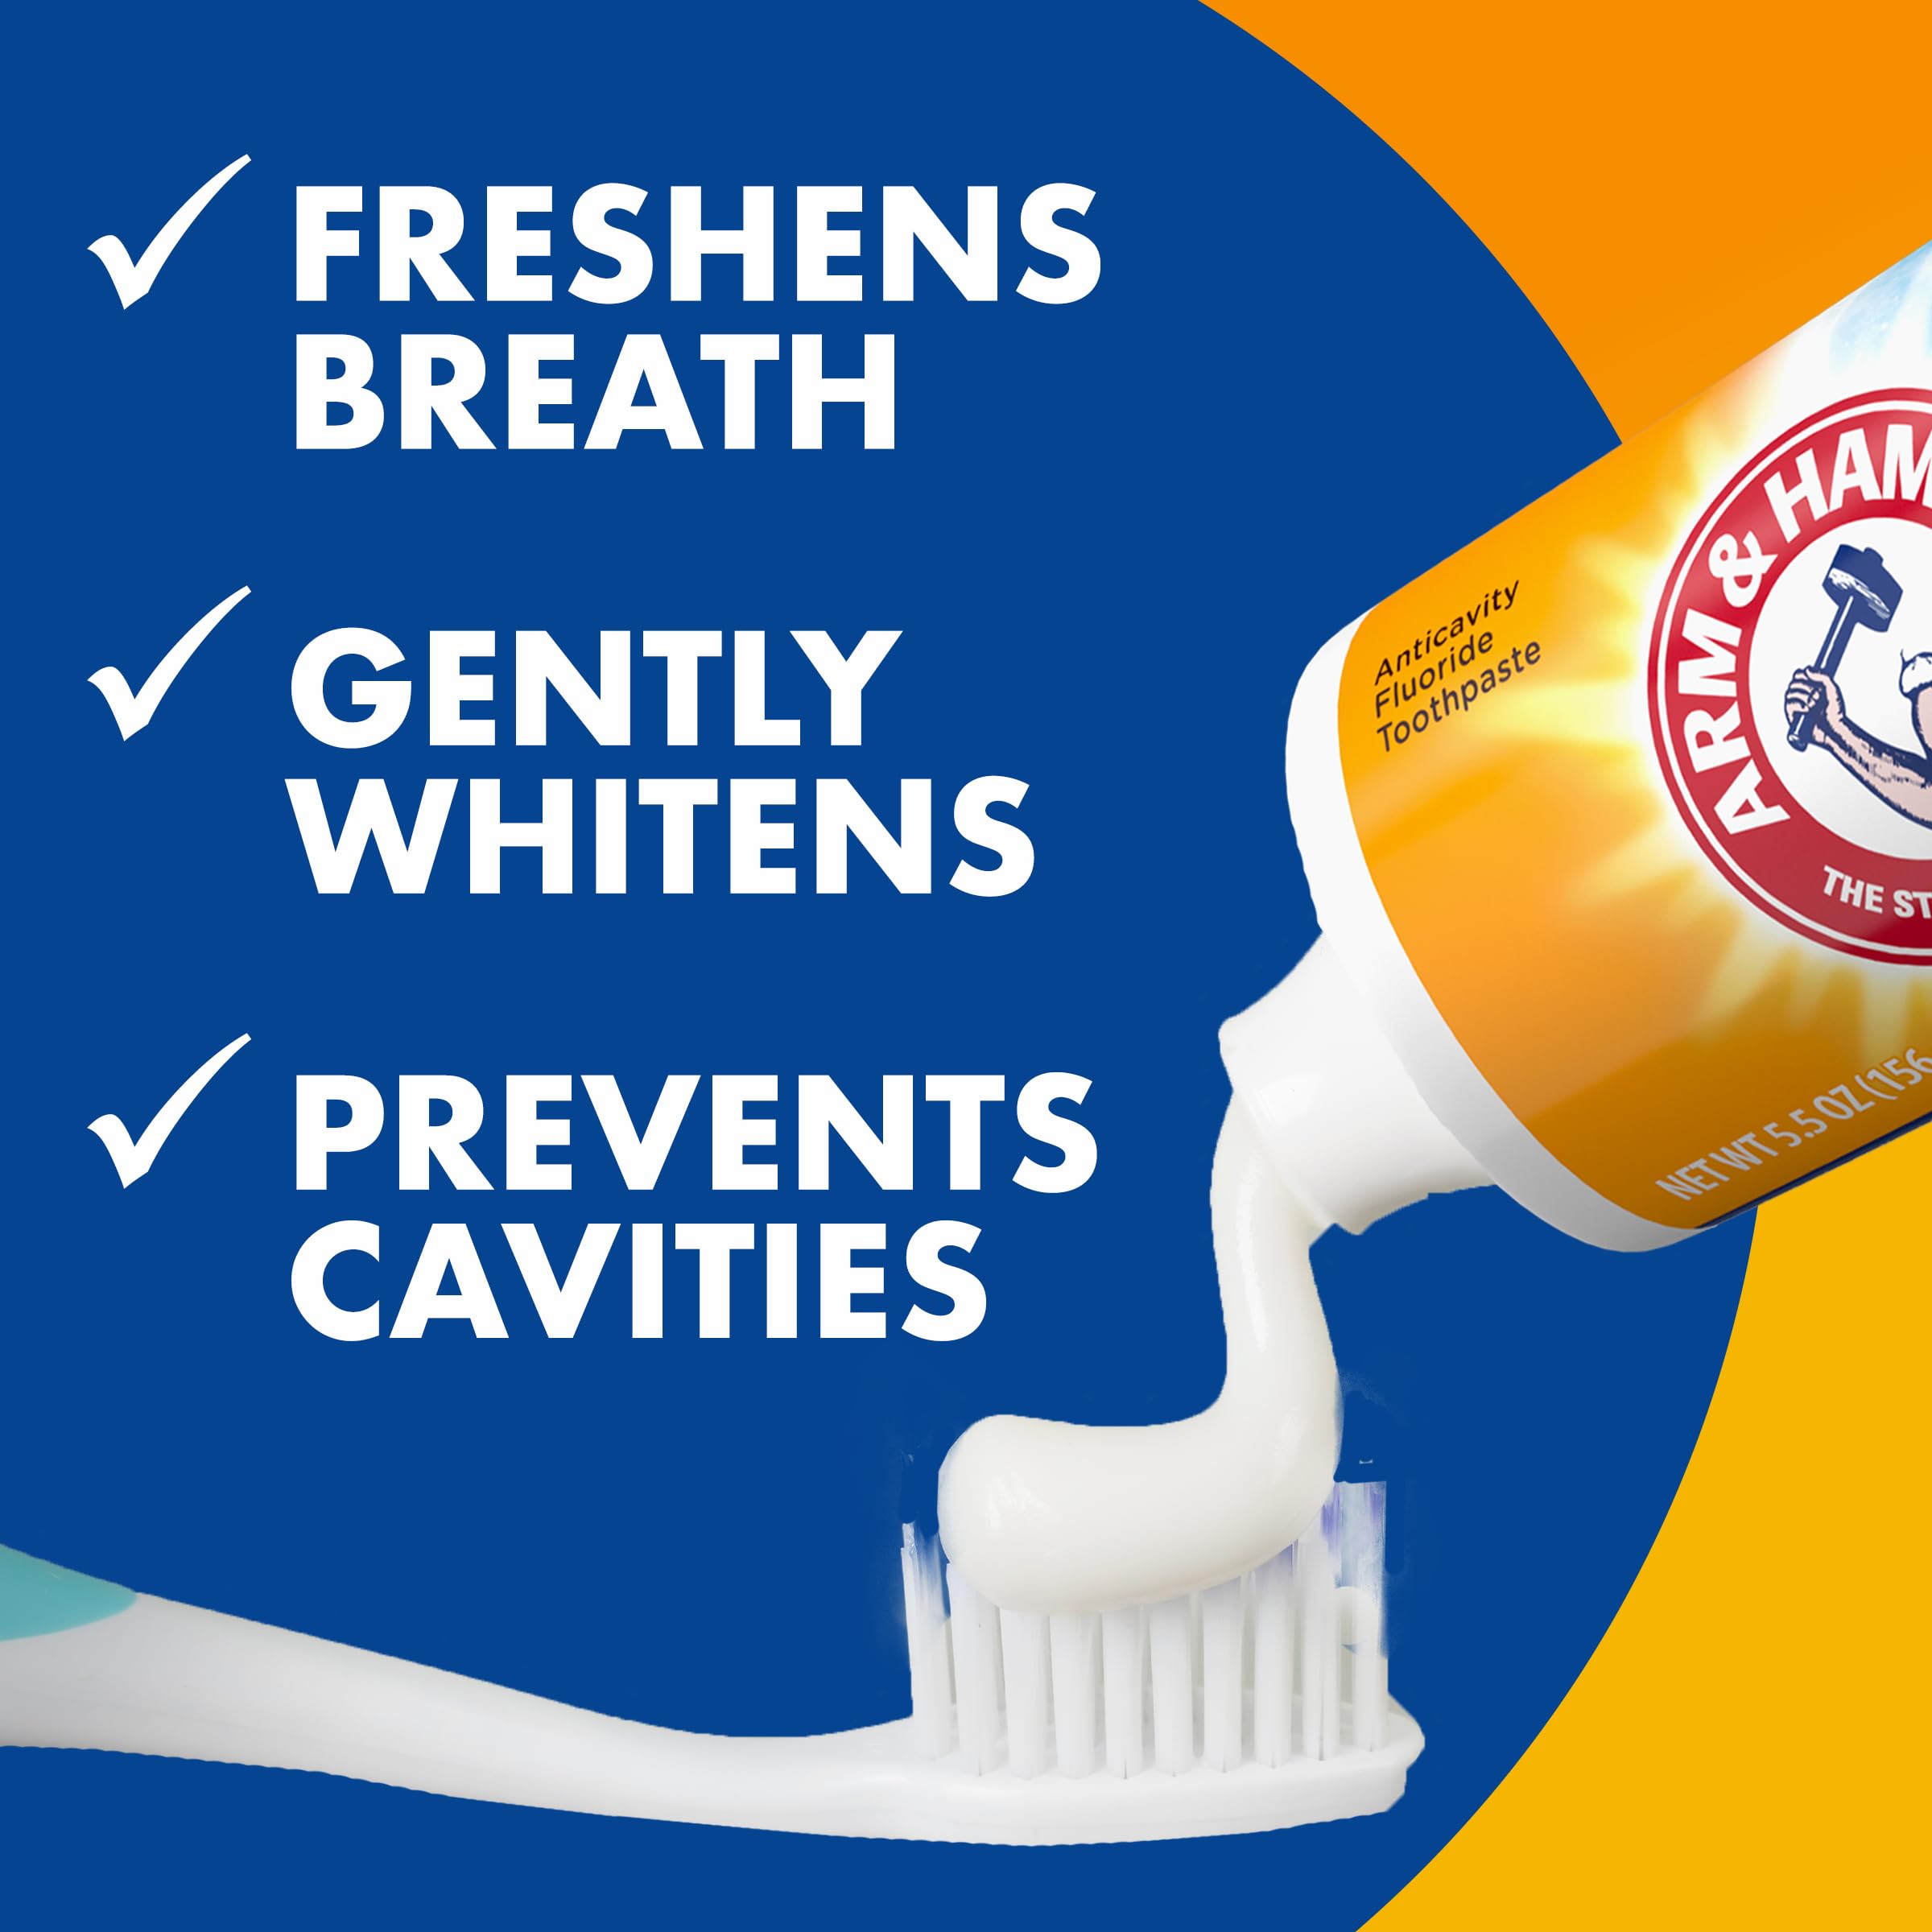 ARM & HAMMER Toothpaste Plus TheraBreath Breath Fresheners, Invigorating ICY Mint Flavor, Whitening Anticavity Fluoride Toothpaste for Bad Breath, 5.5 Oz (Pack of 2)